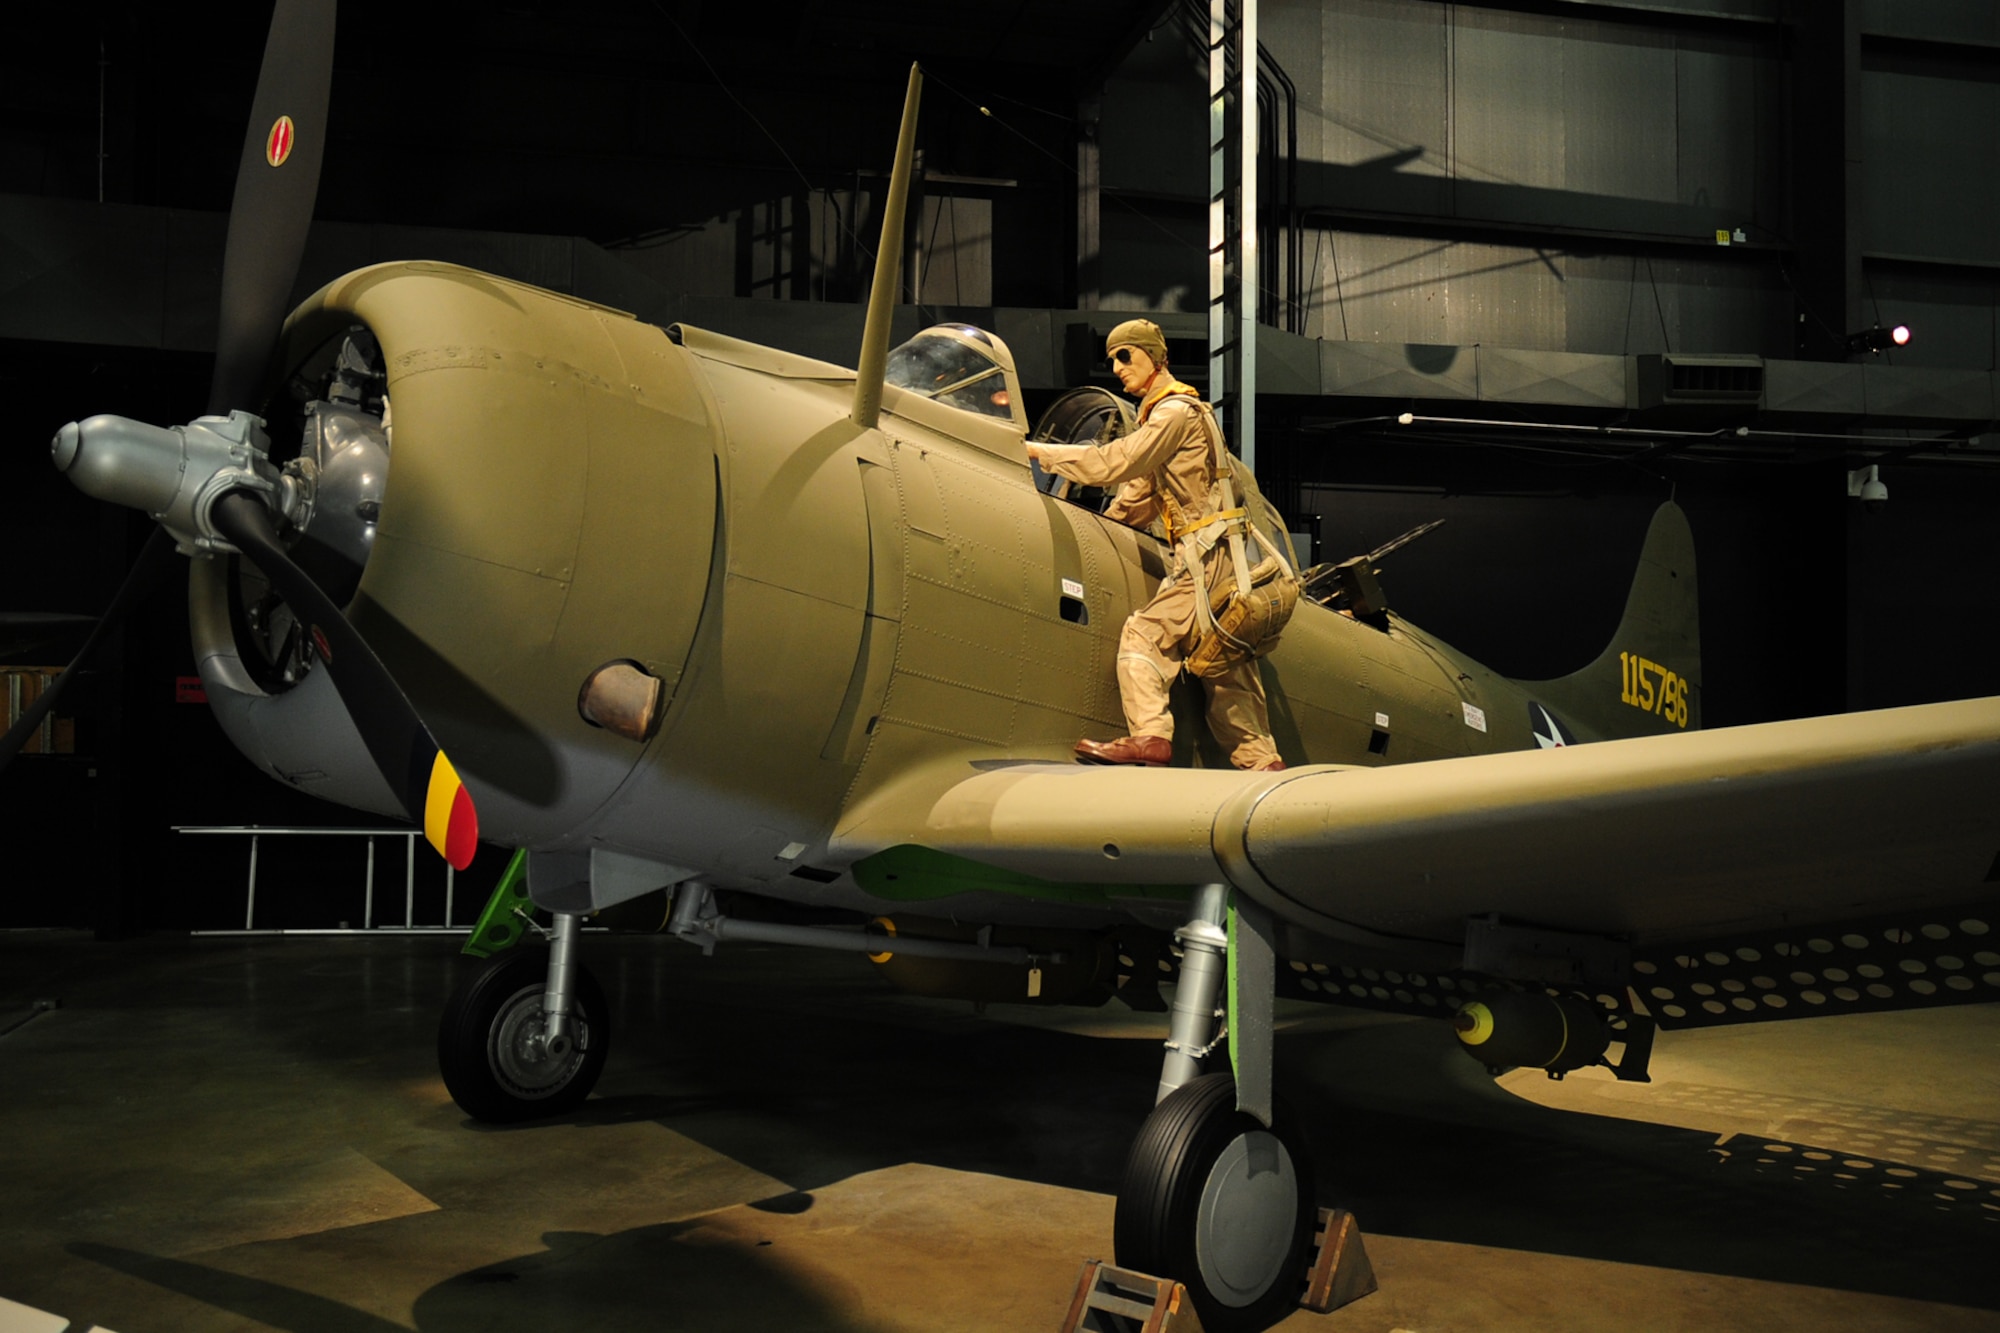 DAYTON, Ohio -- Douglas A-24 in the World War II Gallery at the National Museum of the United States Air Force. (U.S. Air Force photo)